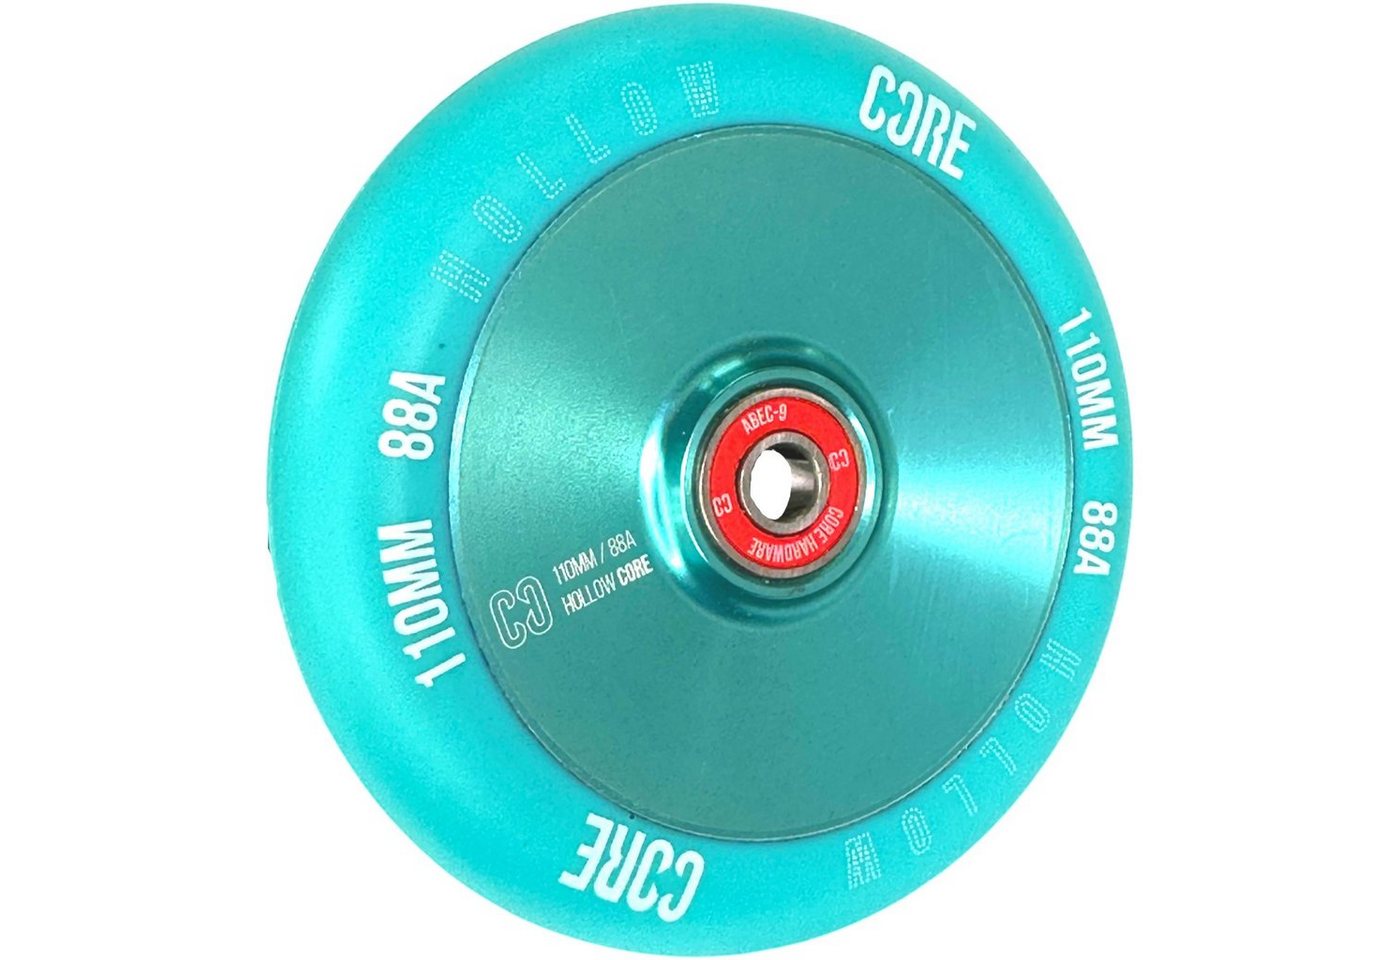 Core Action Sports Stuntscooter Core Hollow V2 Stunt-Scooter Rolle 110mm Mint /PU Mint von Core Action Sports